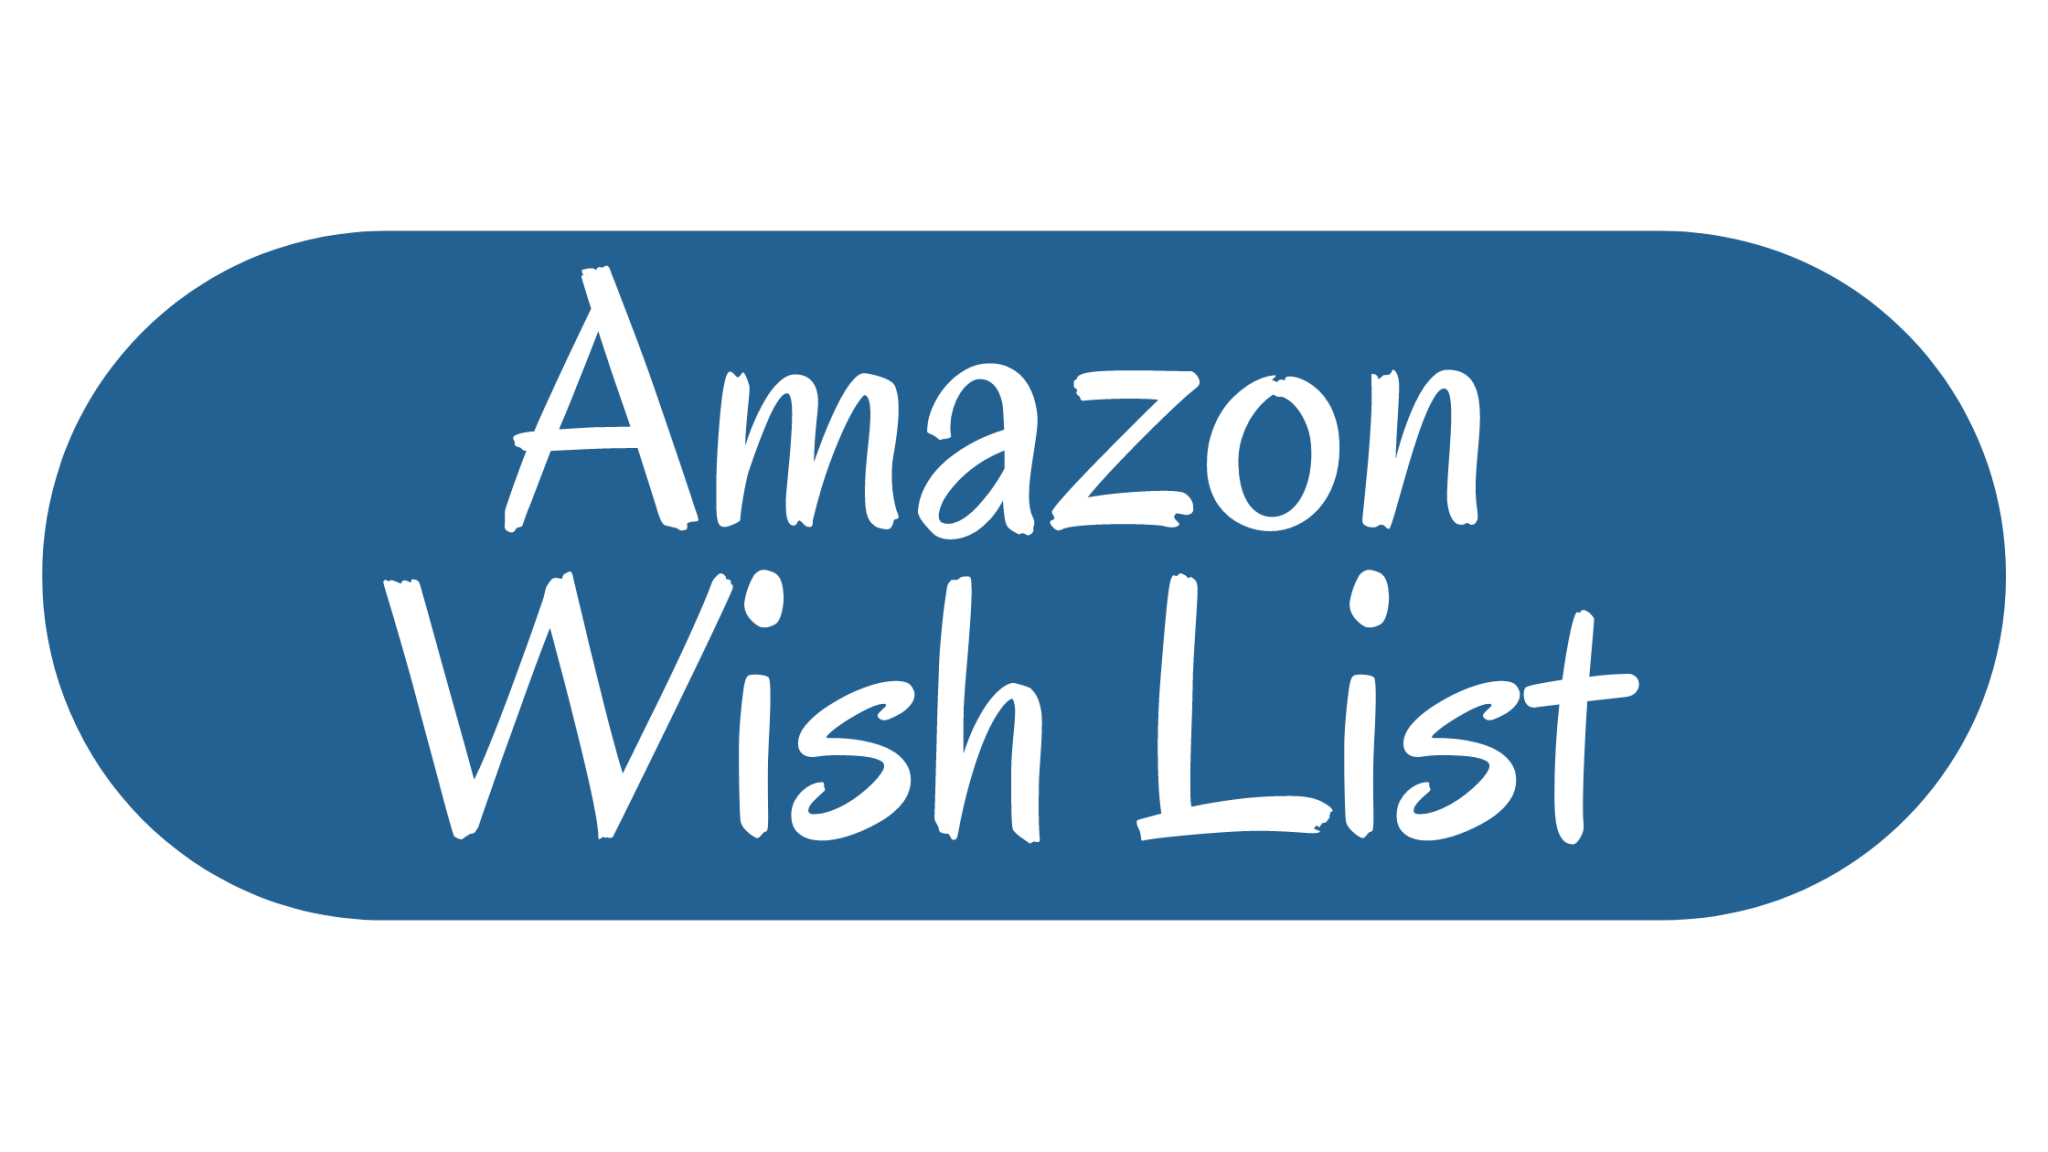 Items purchased amazon list wish Can you